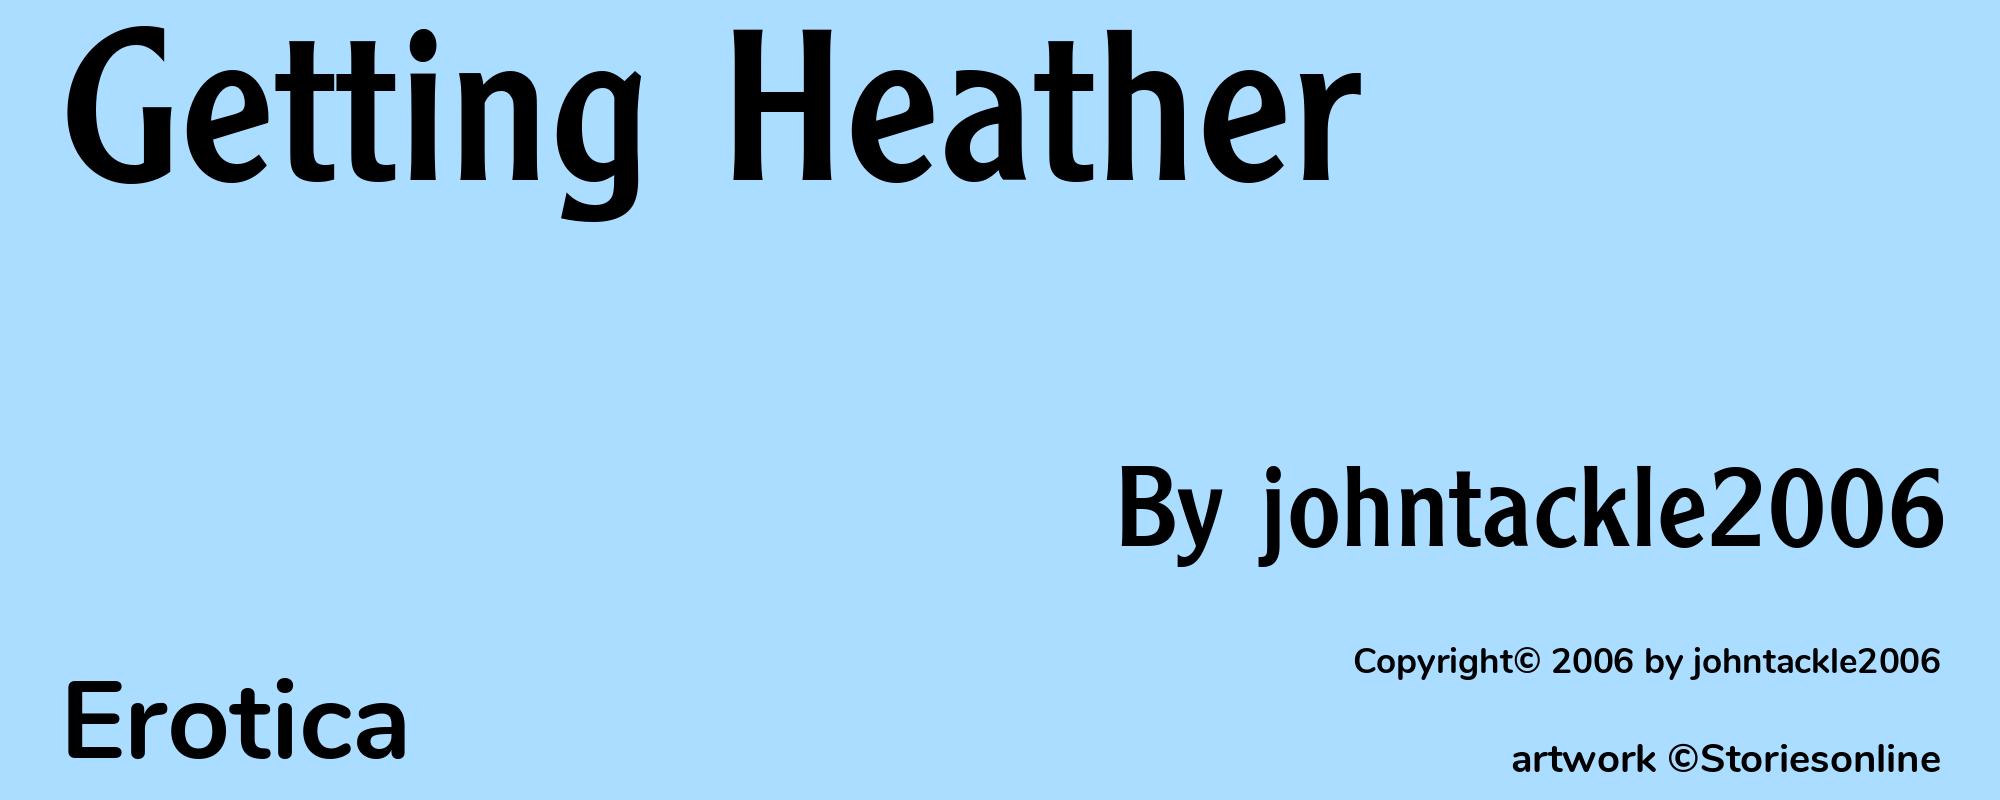 Getting Heather - Cover